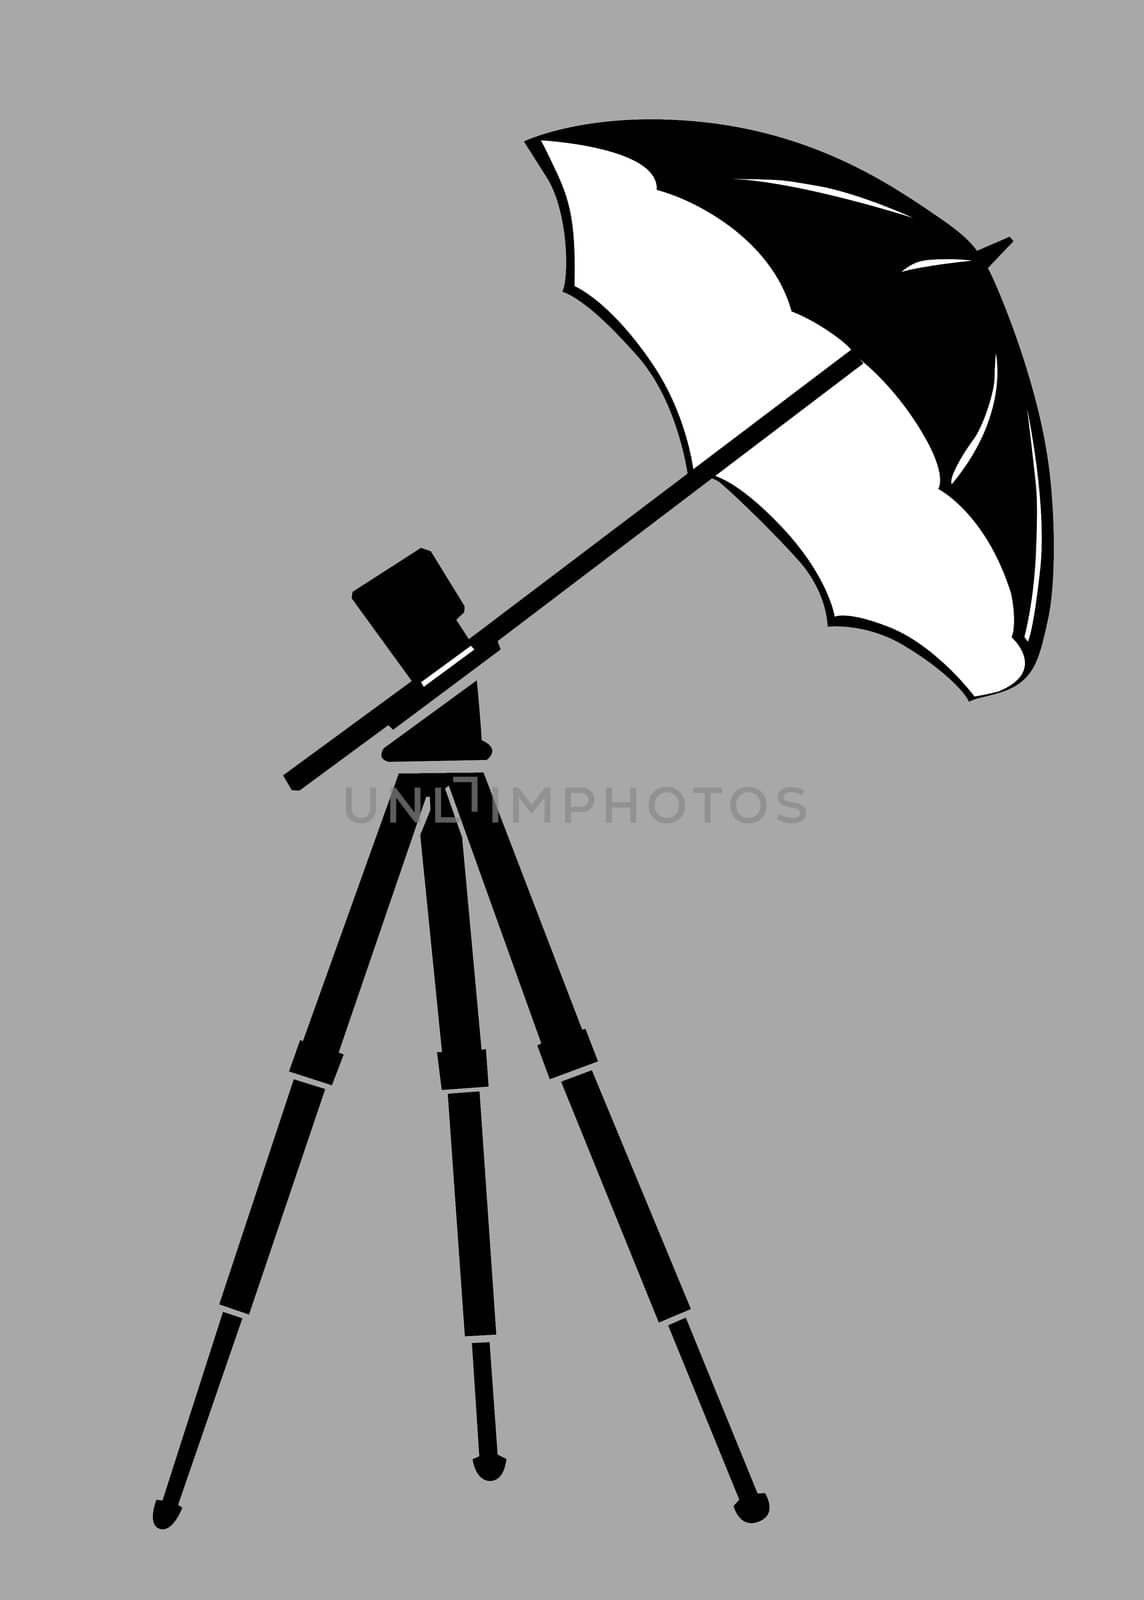 tripod silhouette on gray background by basel101658